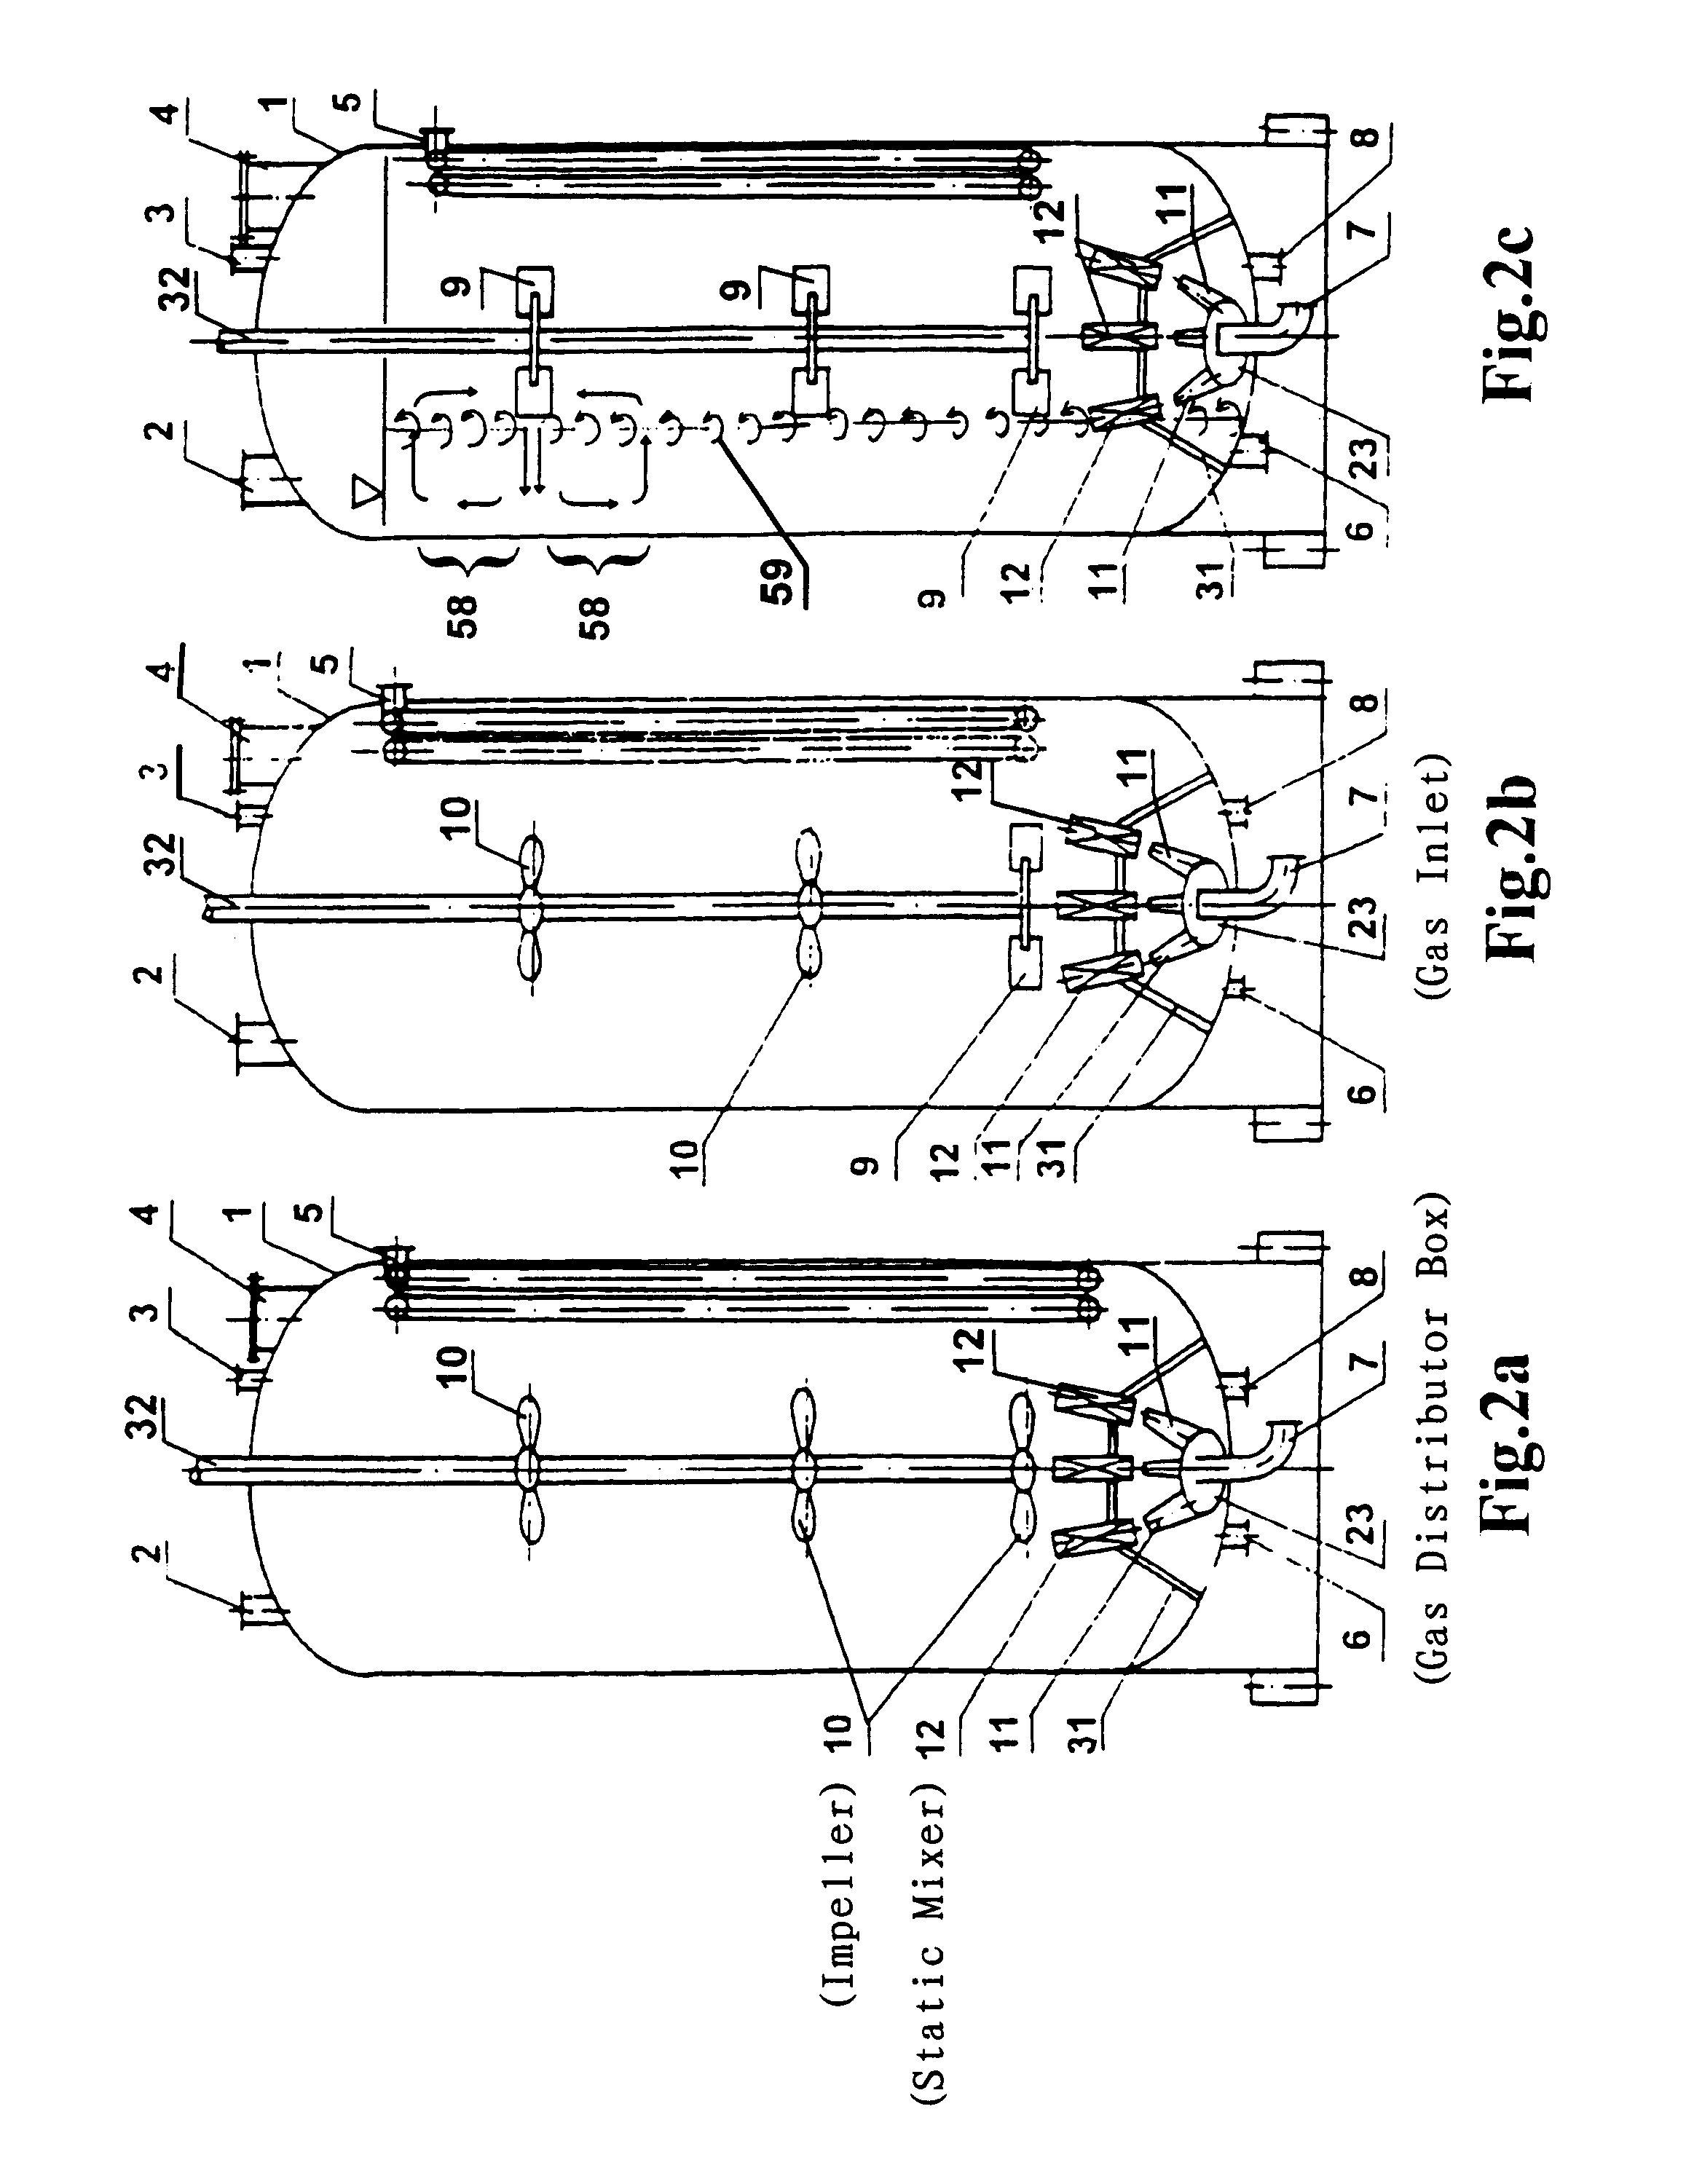 Agitation apparatus with static mixer or swirler means